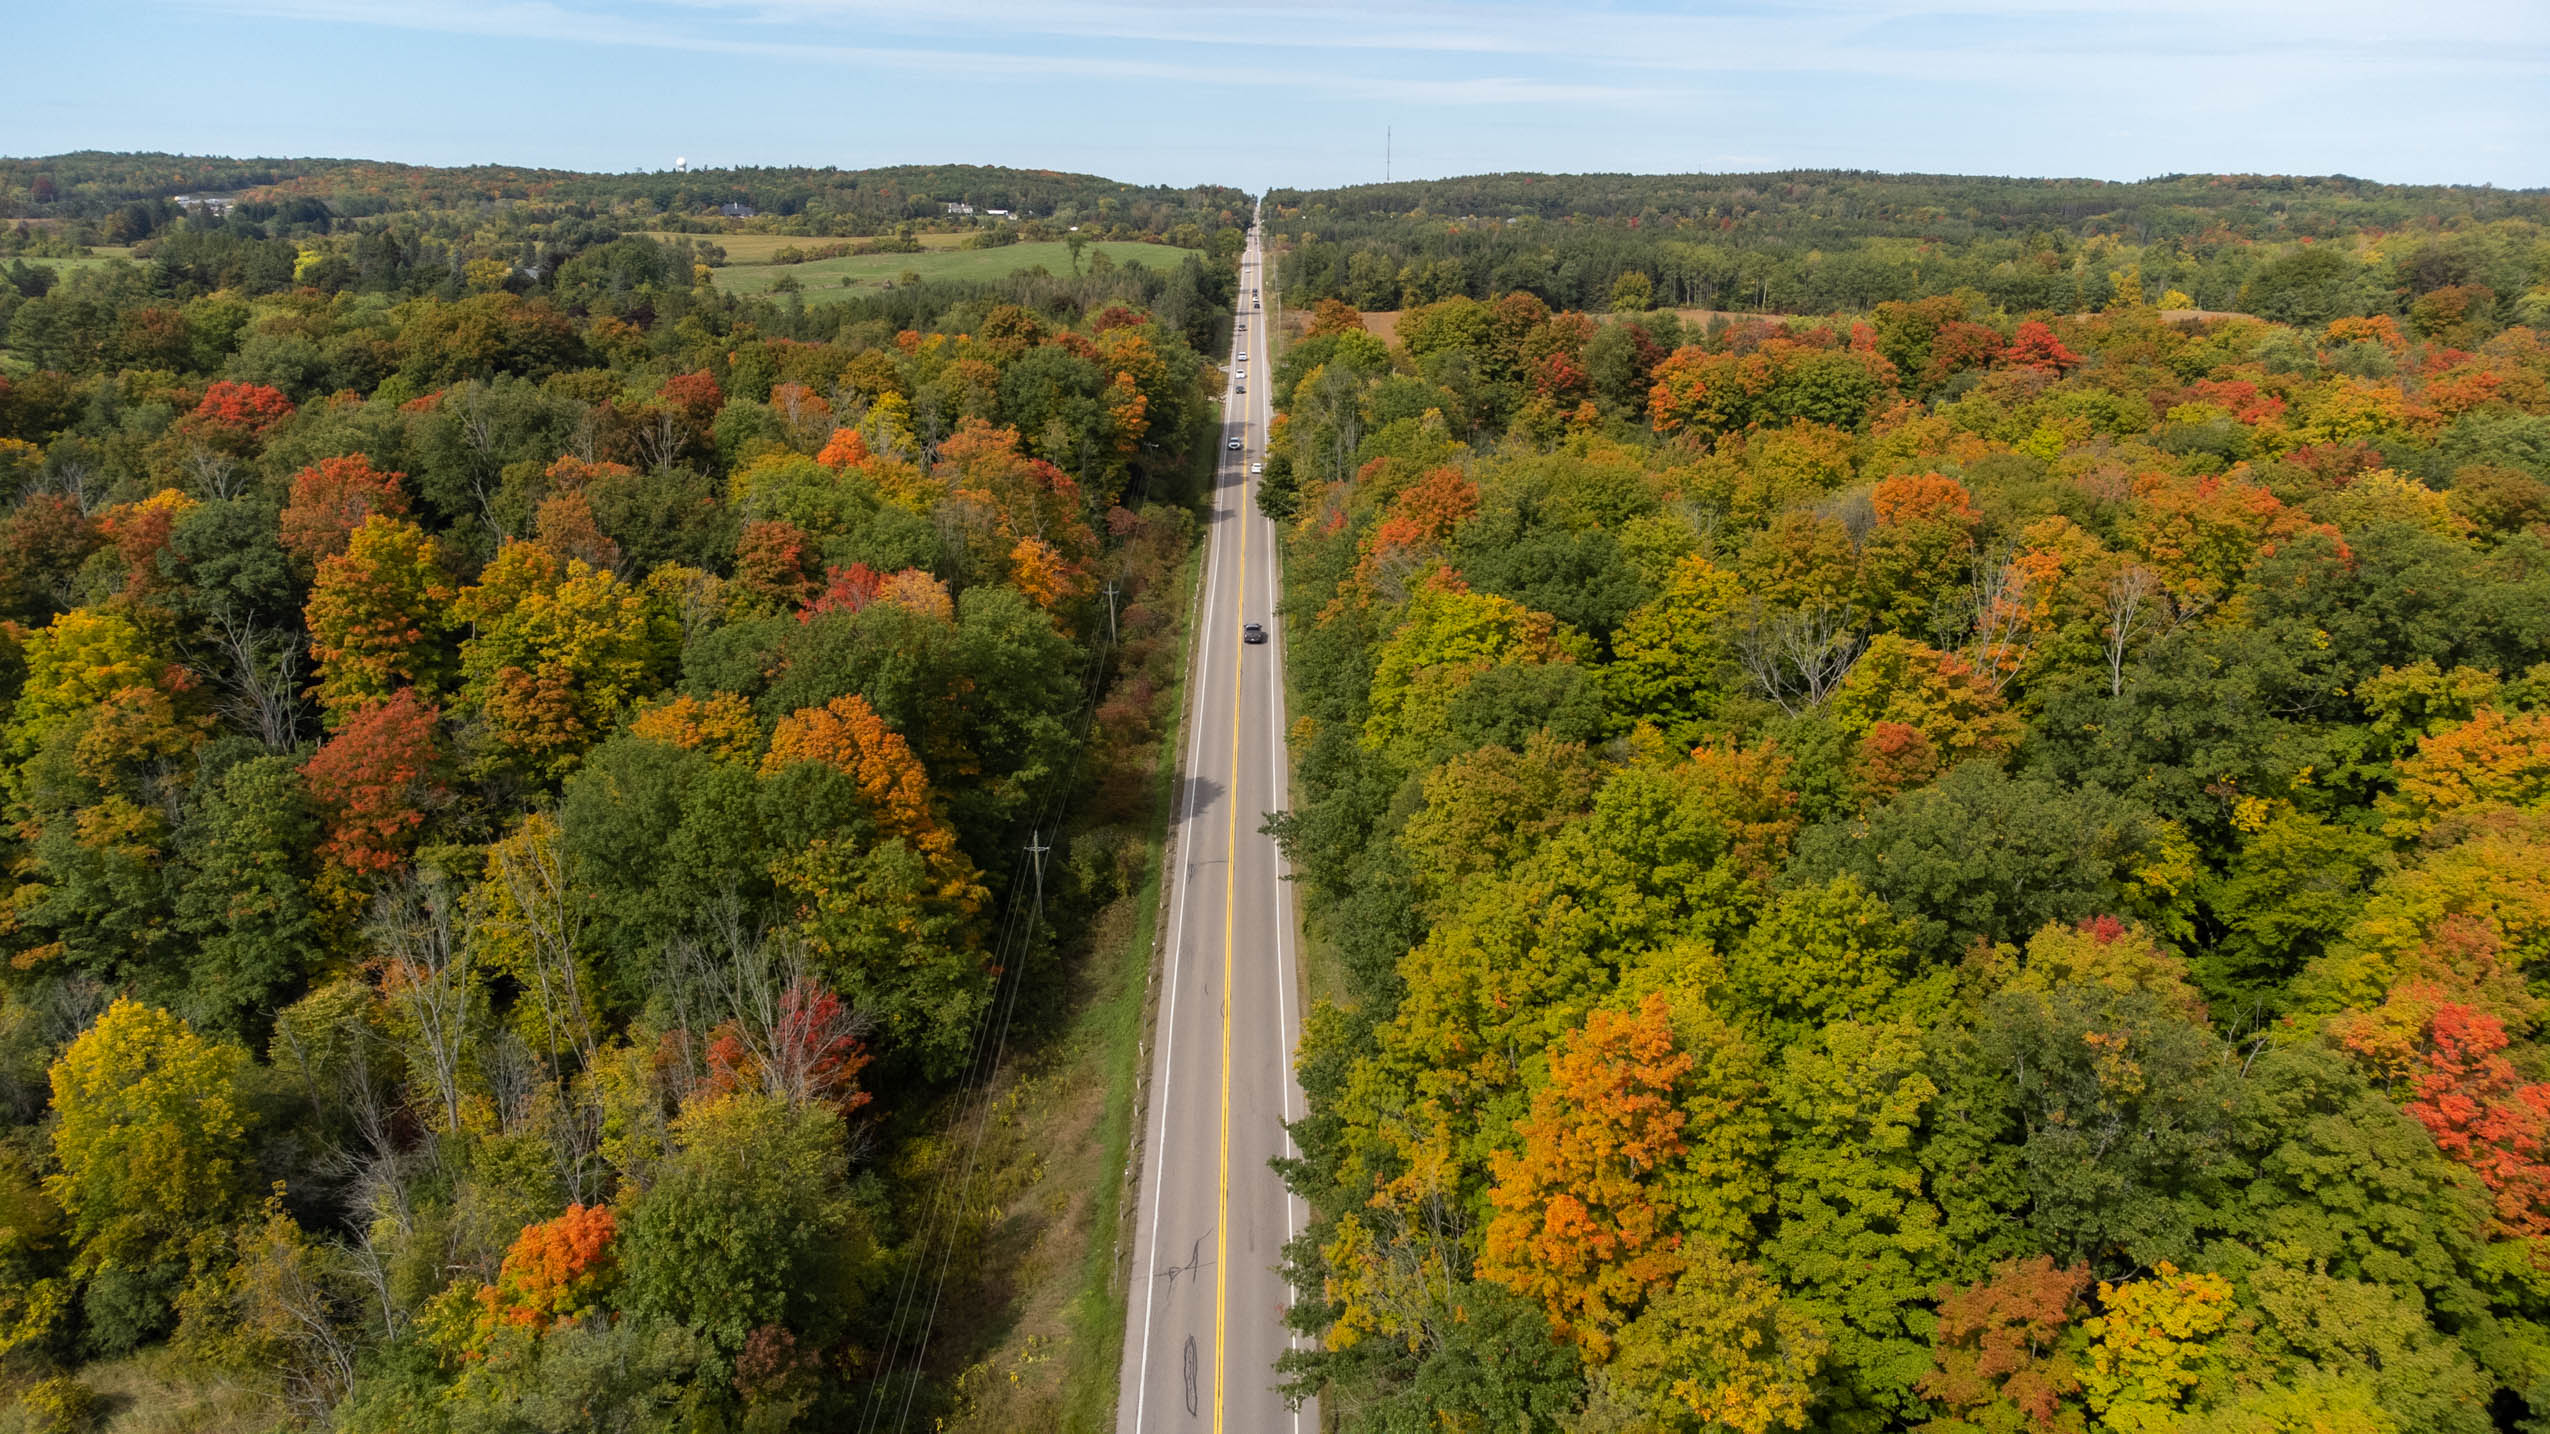 Ontario highways: A road through a forest with fall foliage